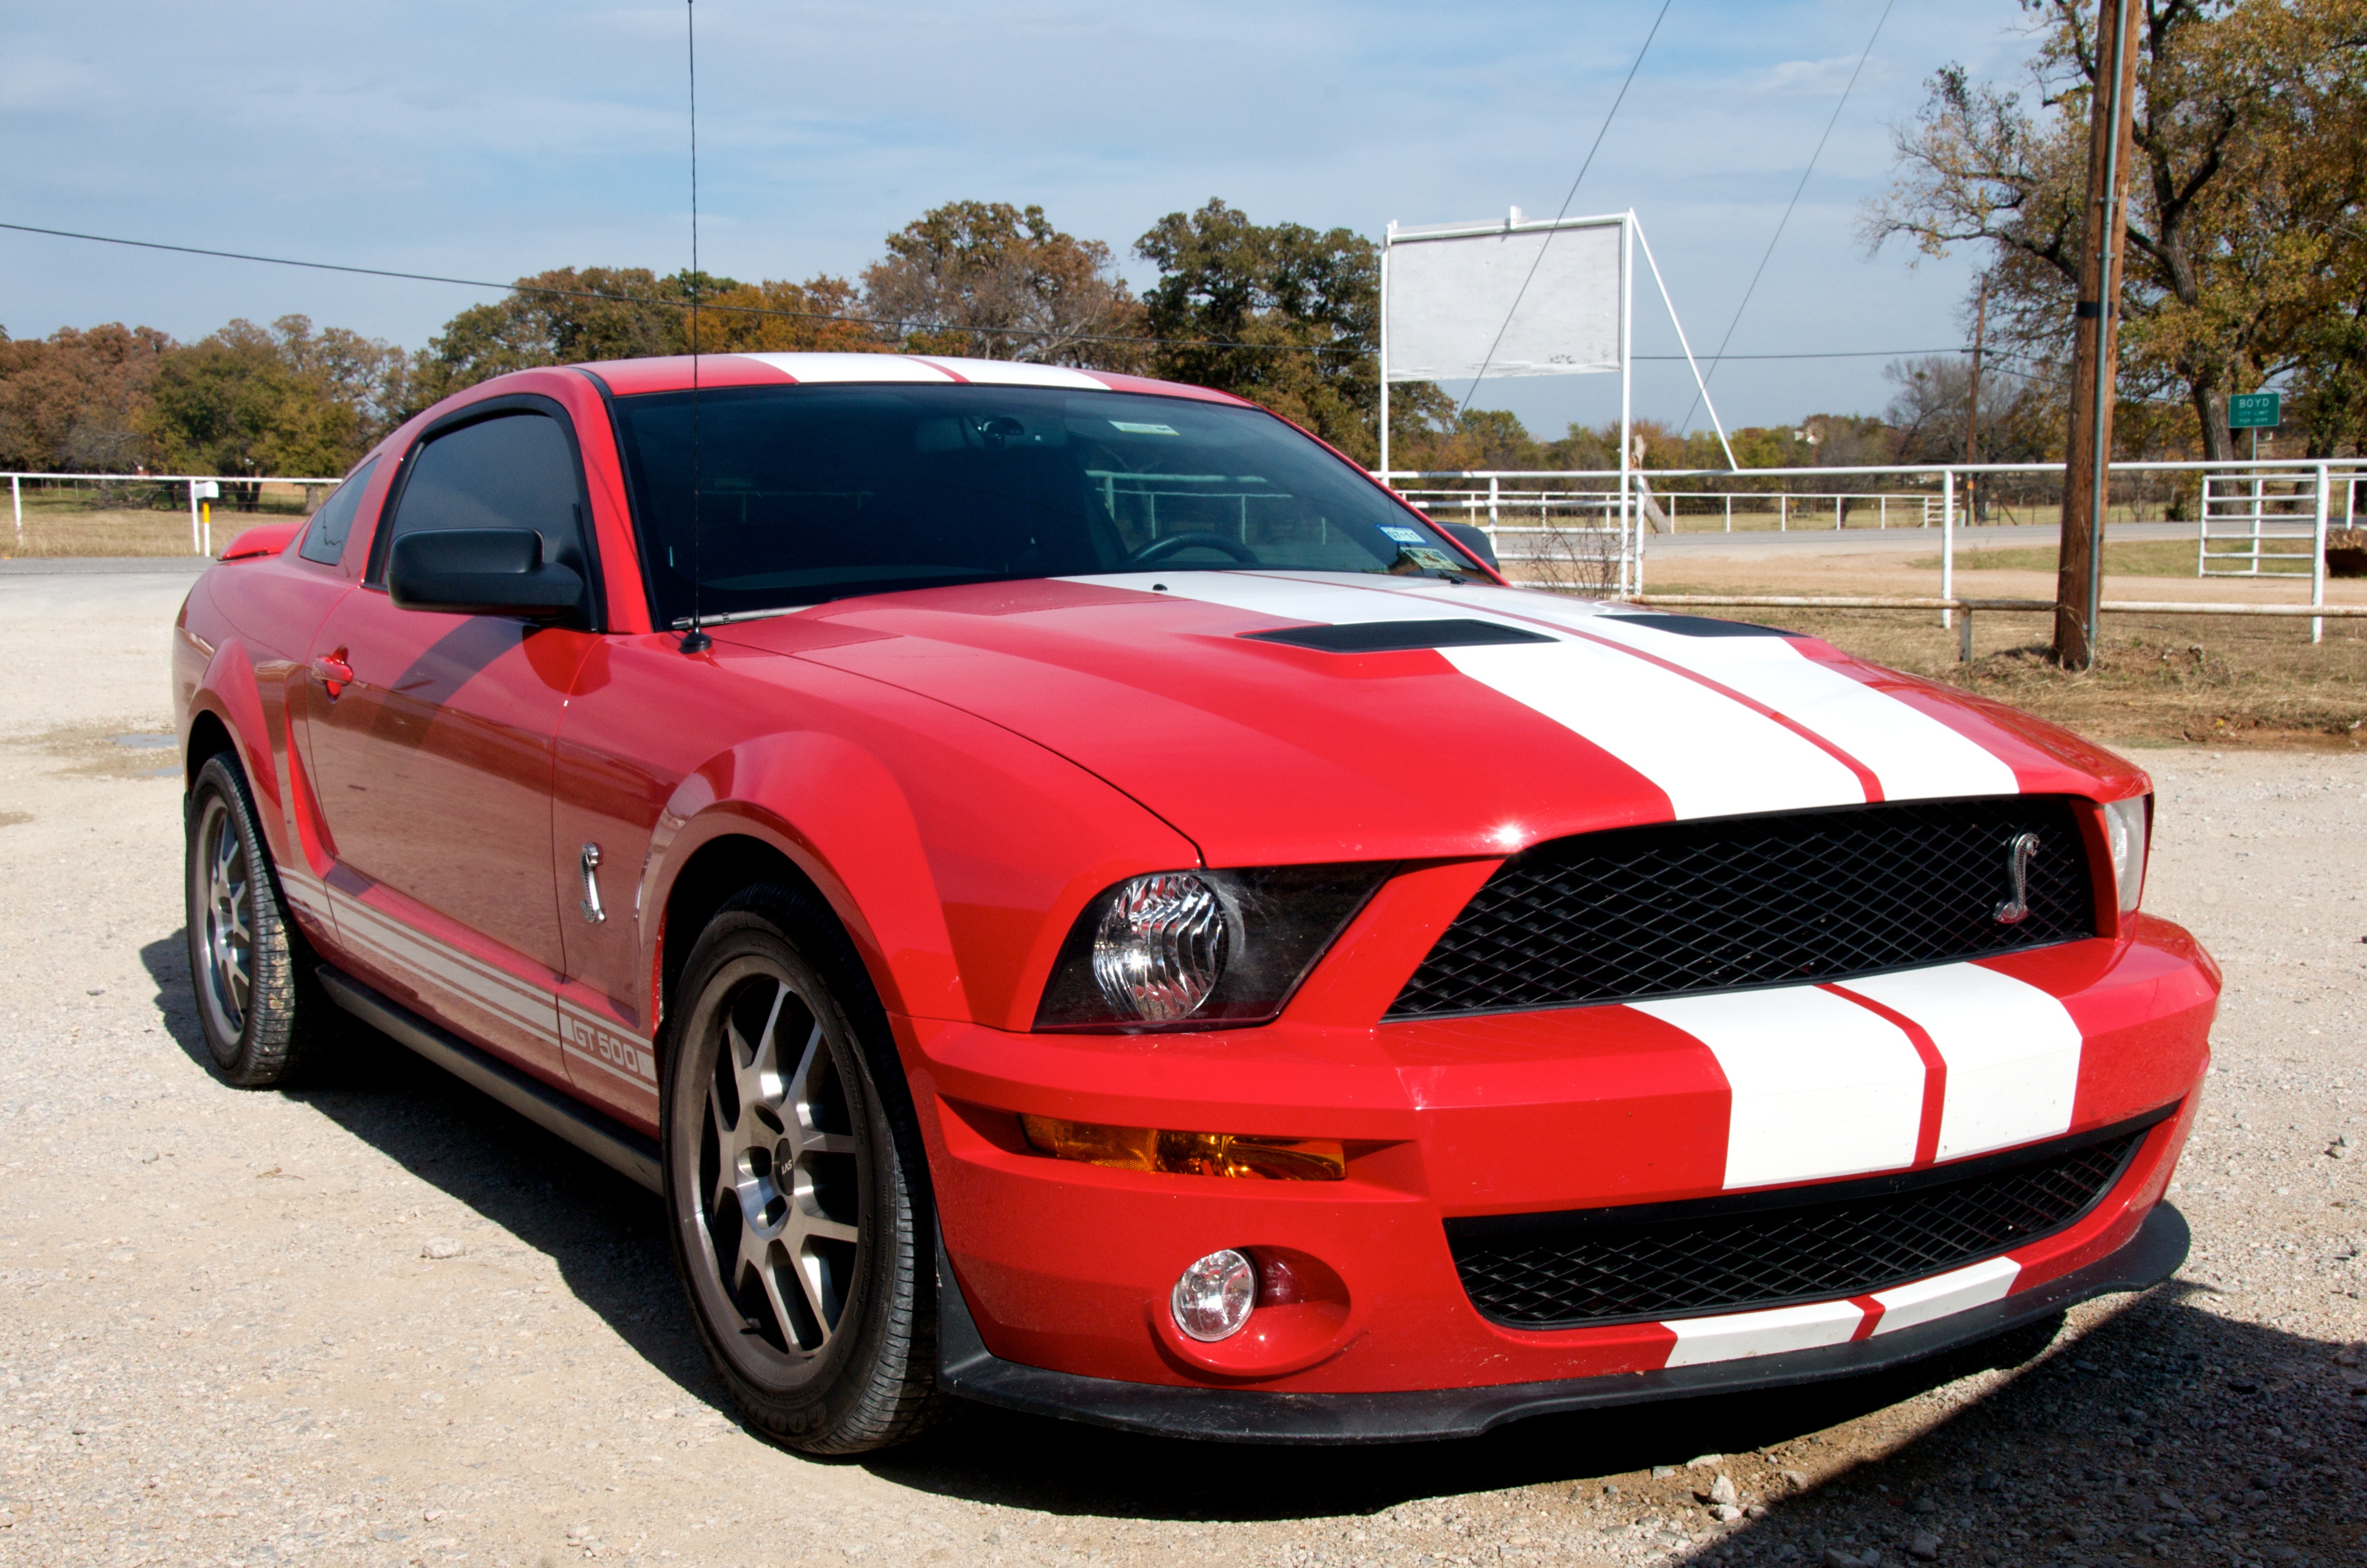 Shelby Mustang GT 500 | Flickr - Photo Sharing!